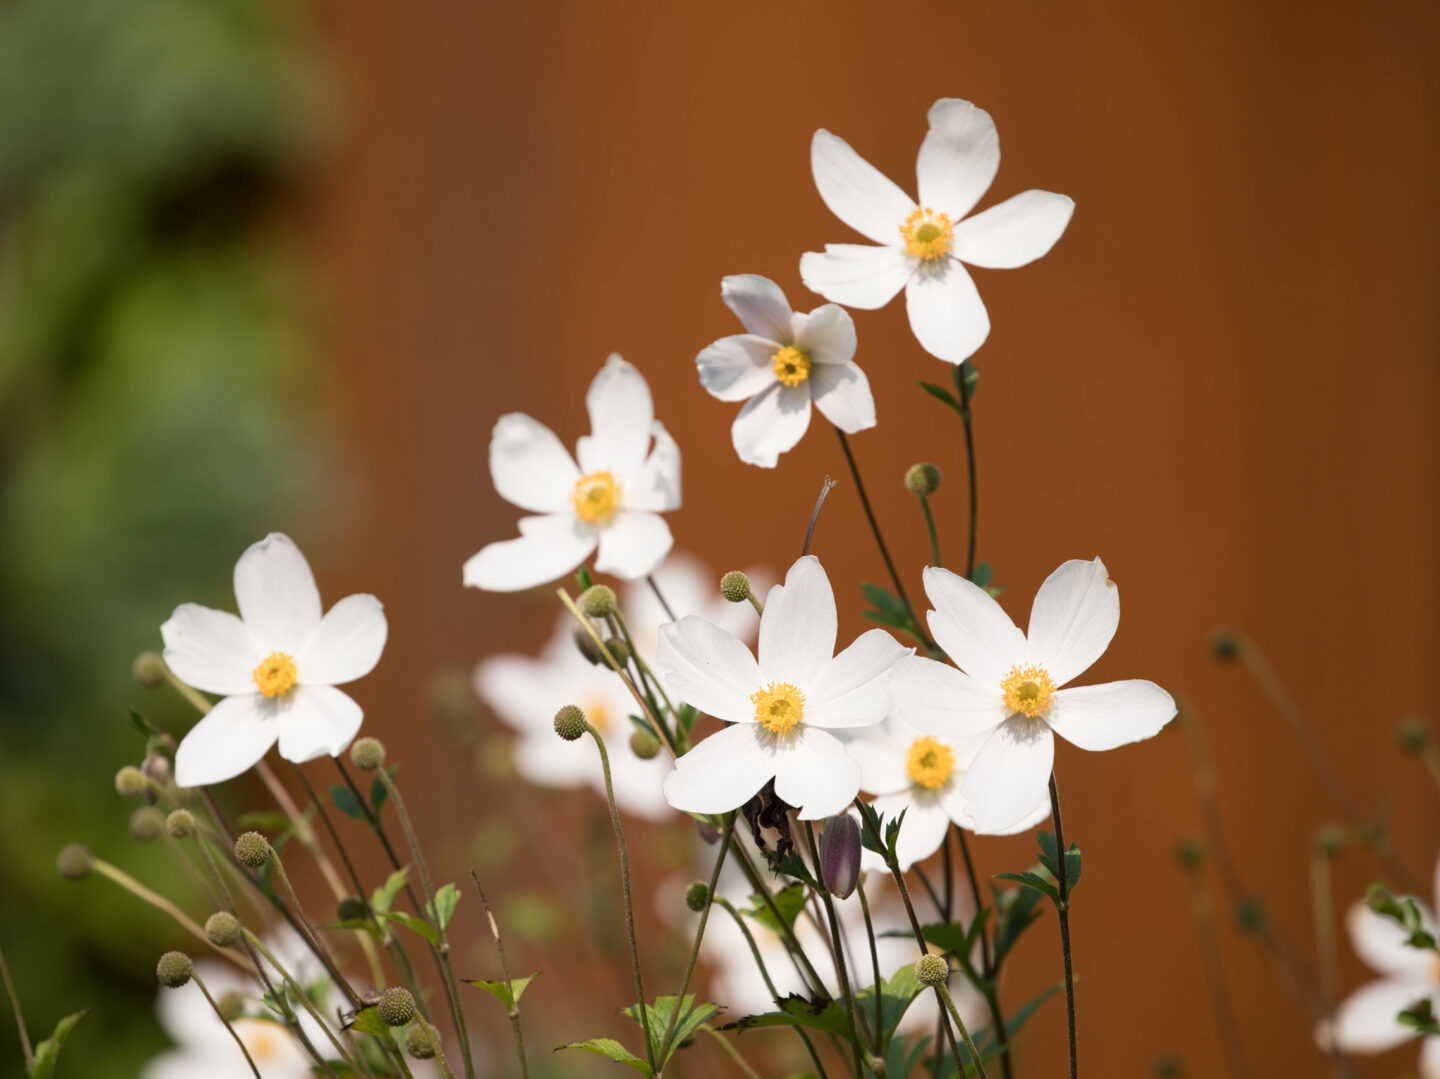 Japanese Anemone blooming in Little Island at Hudson River Park